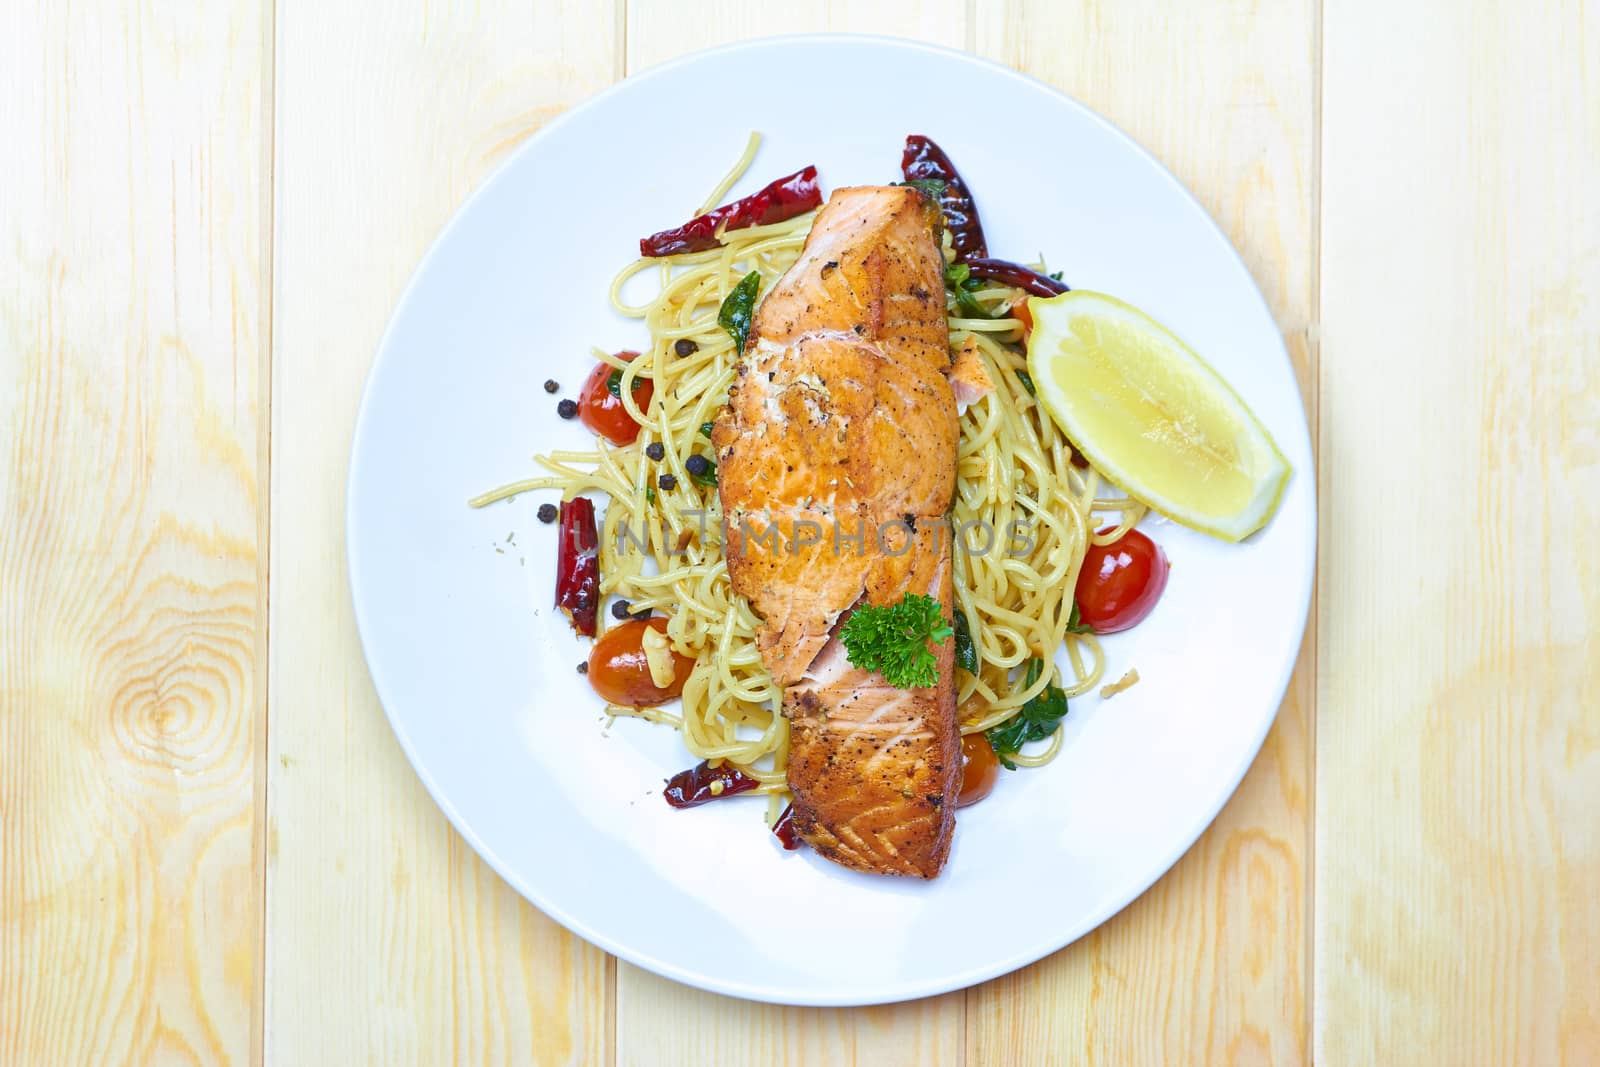 Spaghetti Salmon with chilli, tomato on white plate over wood background, View top